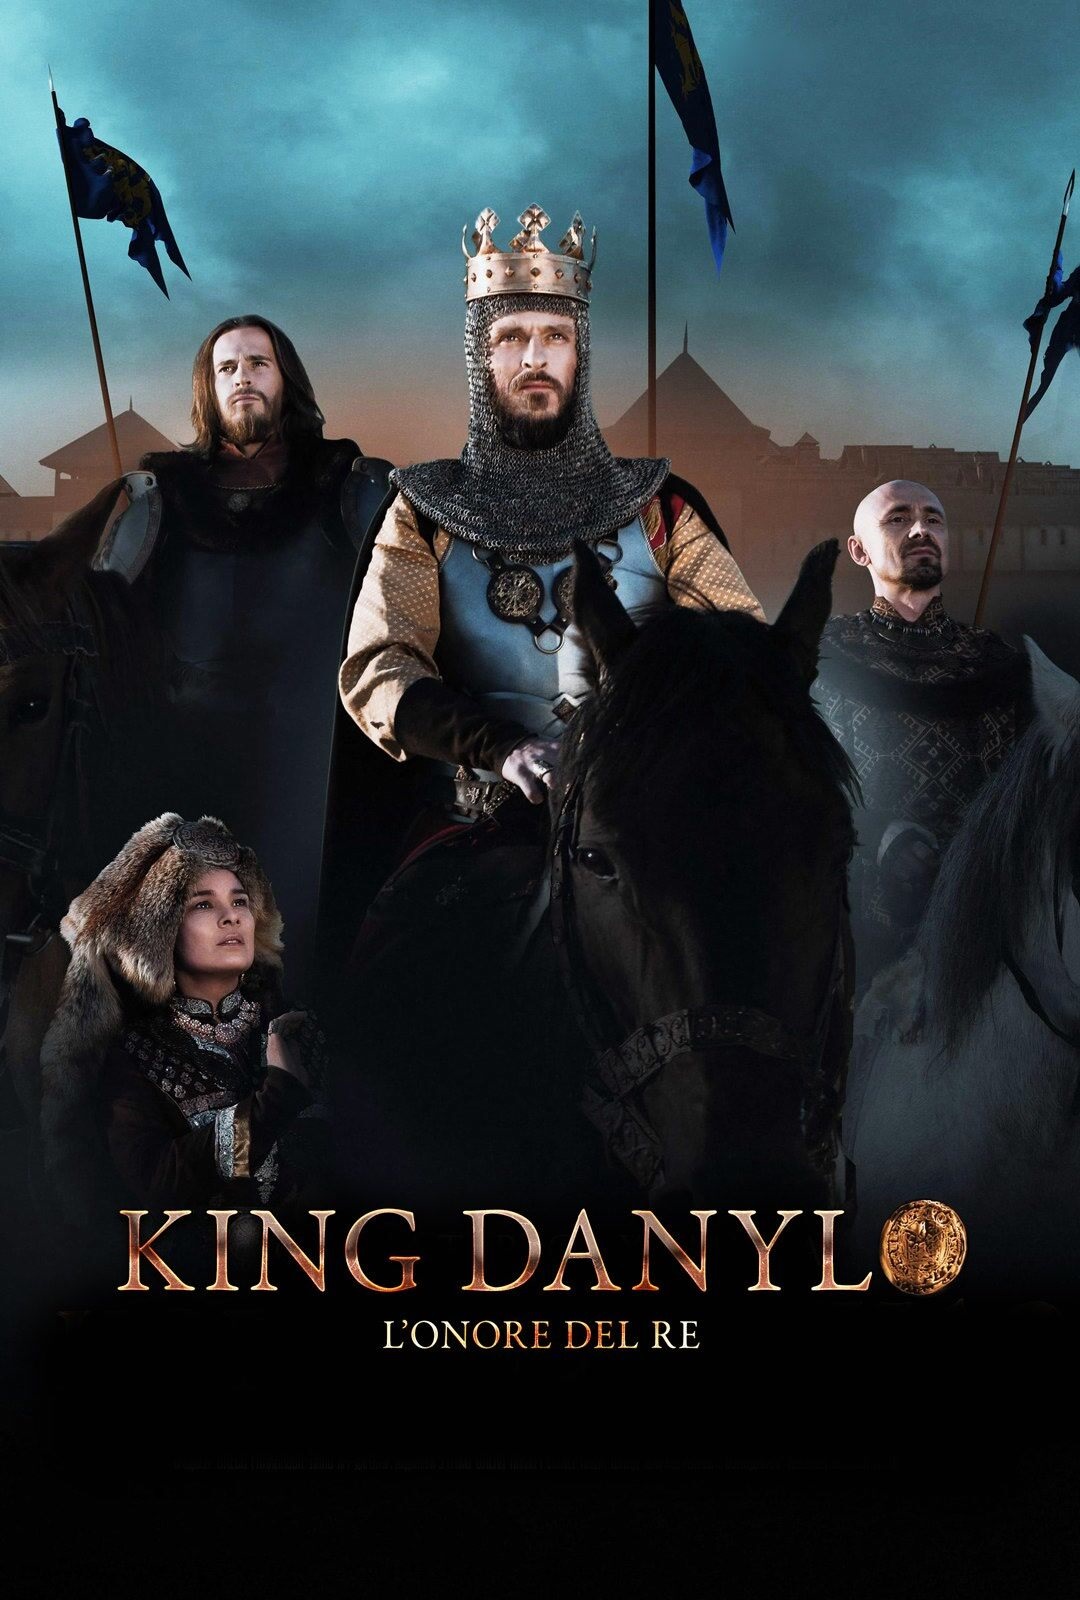 King Danylo – L’onore del Re [HD] (2018)